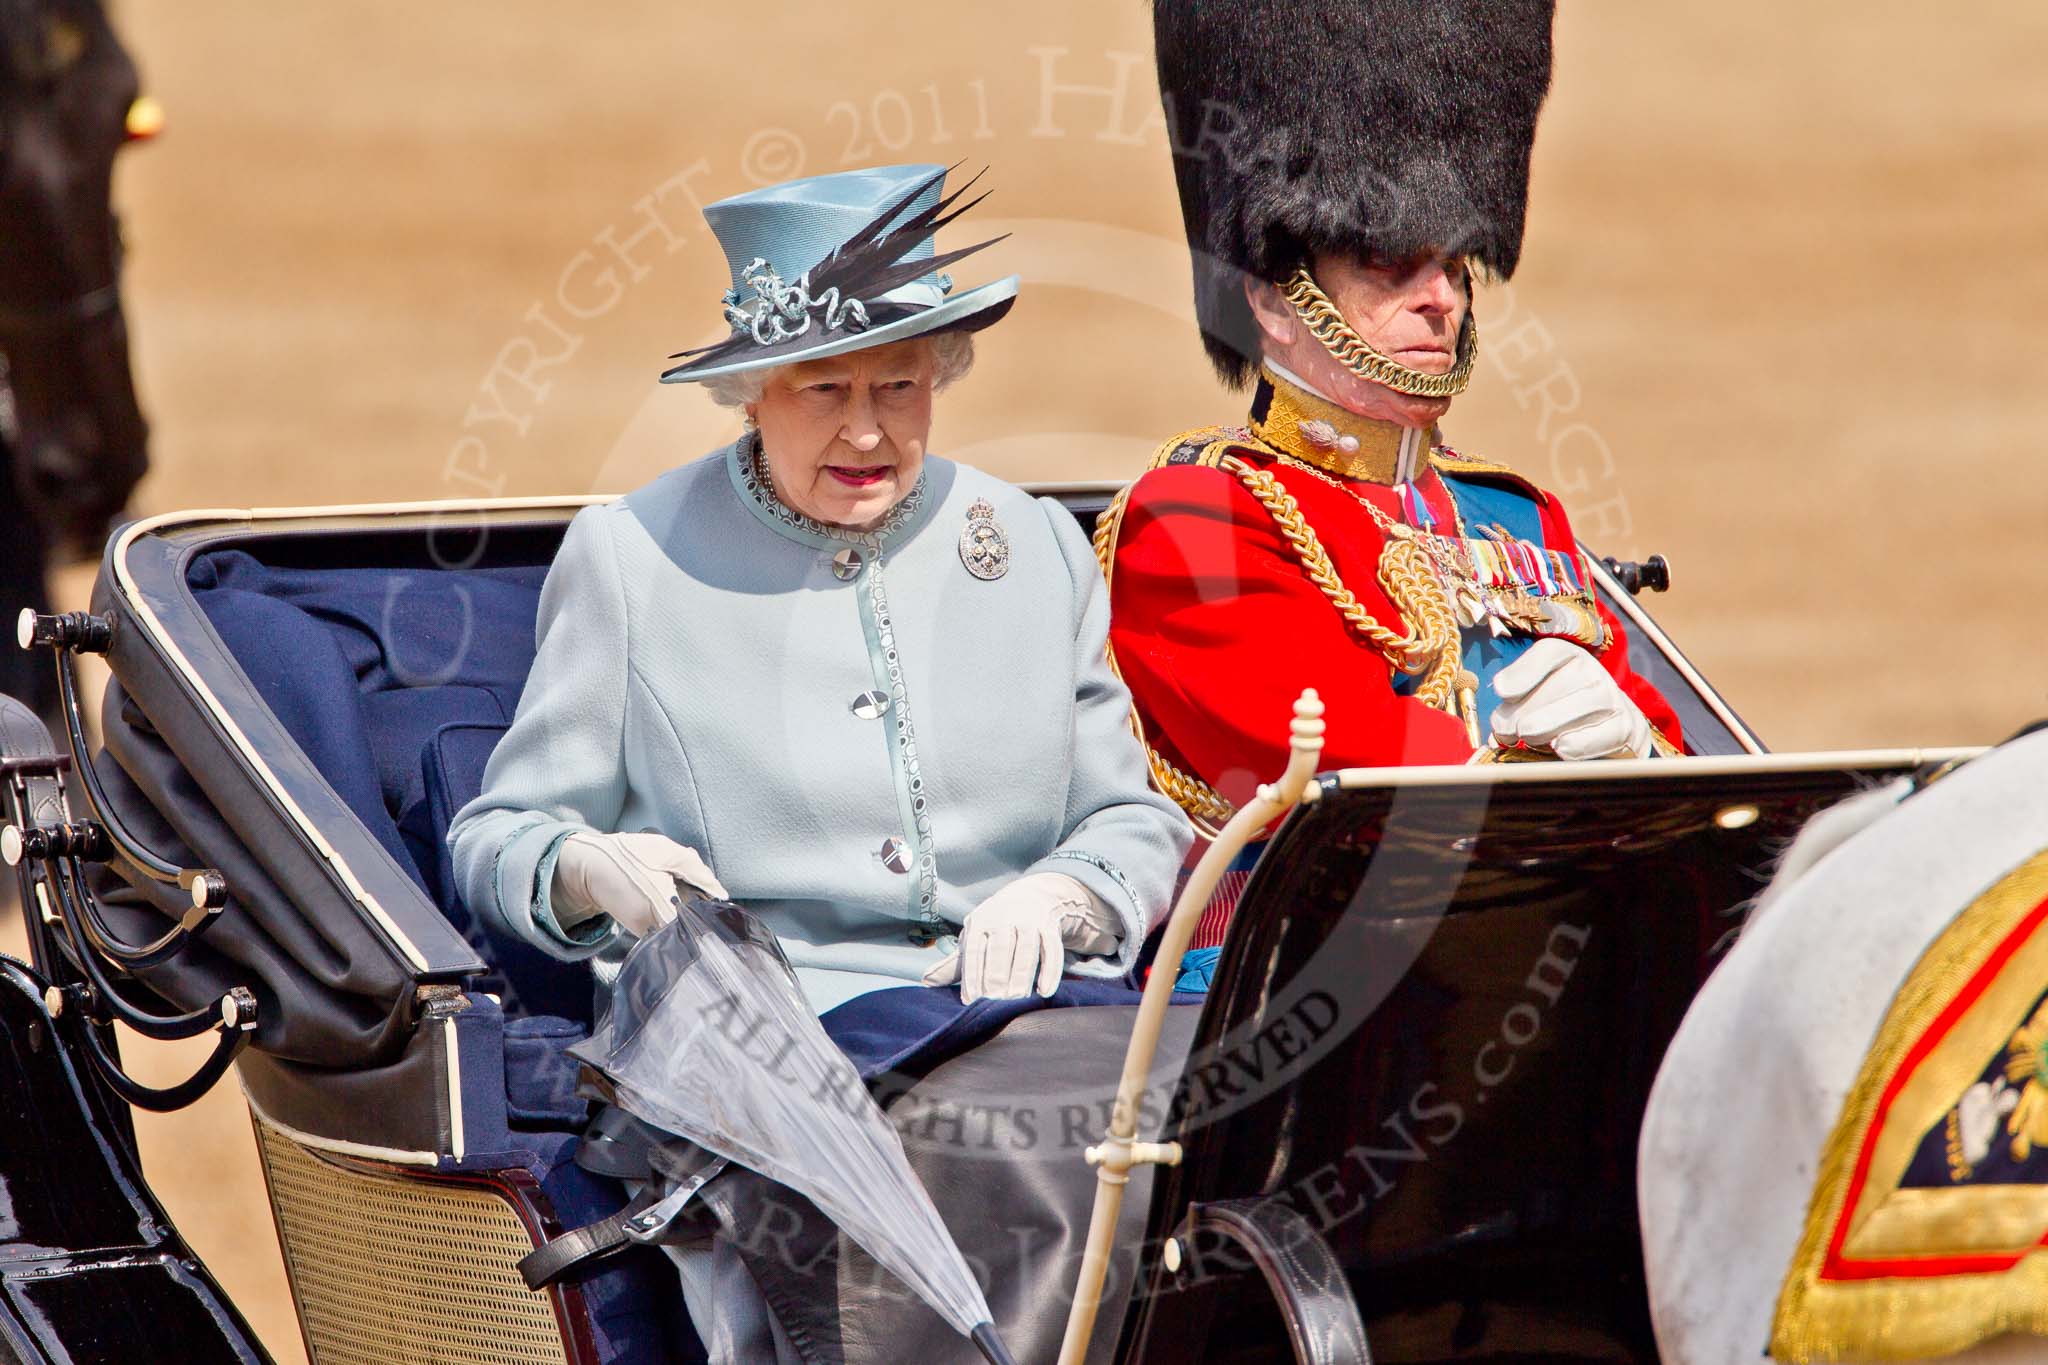 Trooping the Colour 2011: Her Majesty The Queen with Prince Philip in the ivory mounted phaeton, arriving on Horse Guards Parade, about to leave the carriage..
Horse Guards Parade, Westminster,
London SW1,
Greater London,
United Kingdom,
on 11 June 2011 at 10:59, image #128